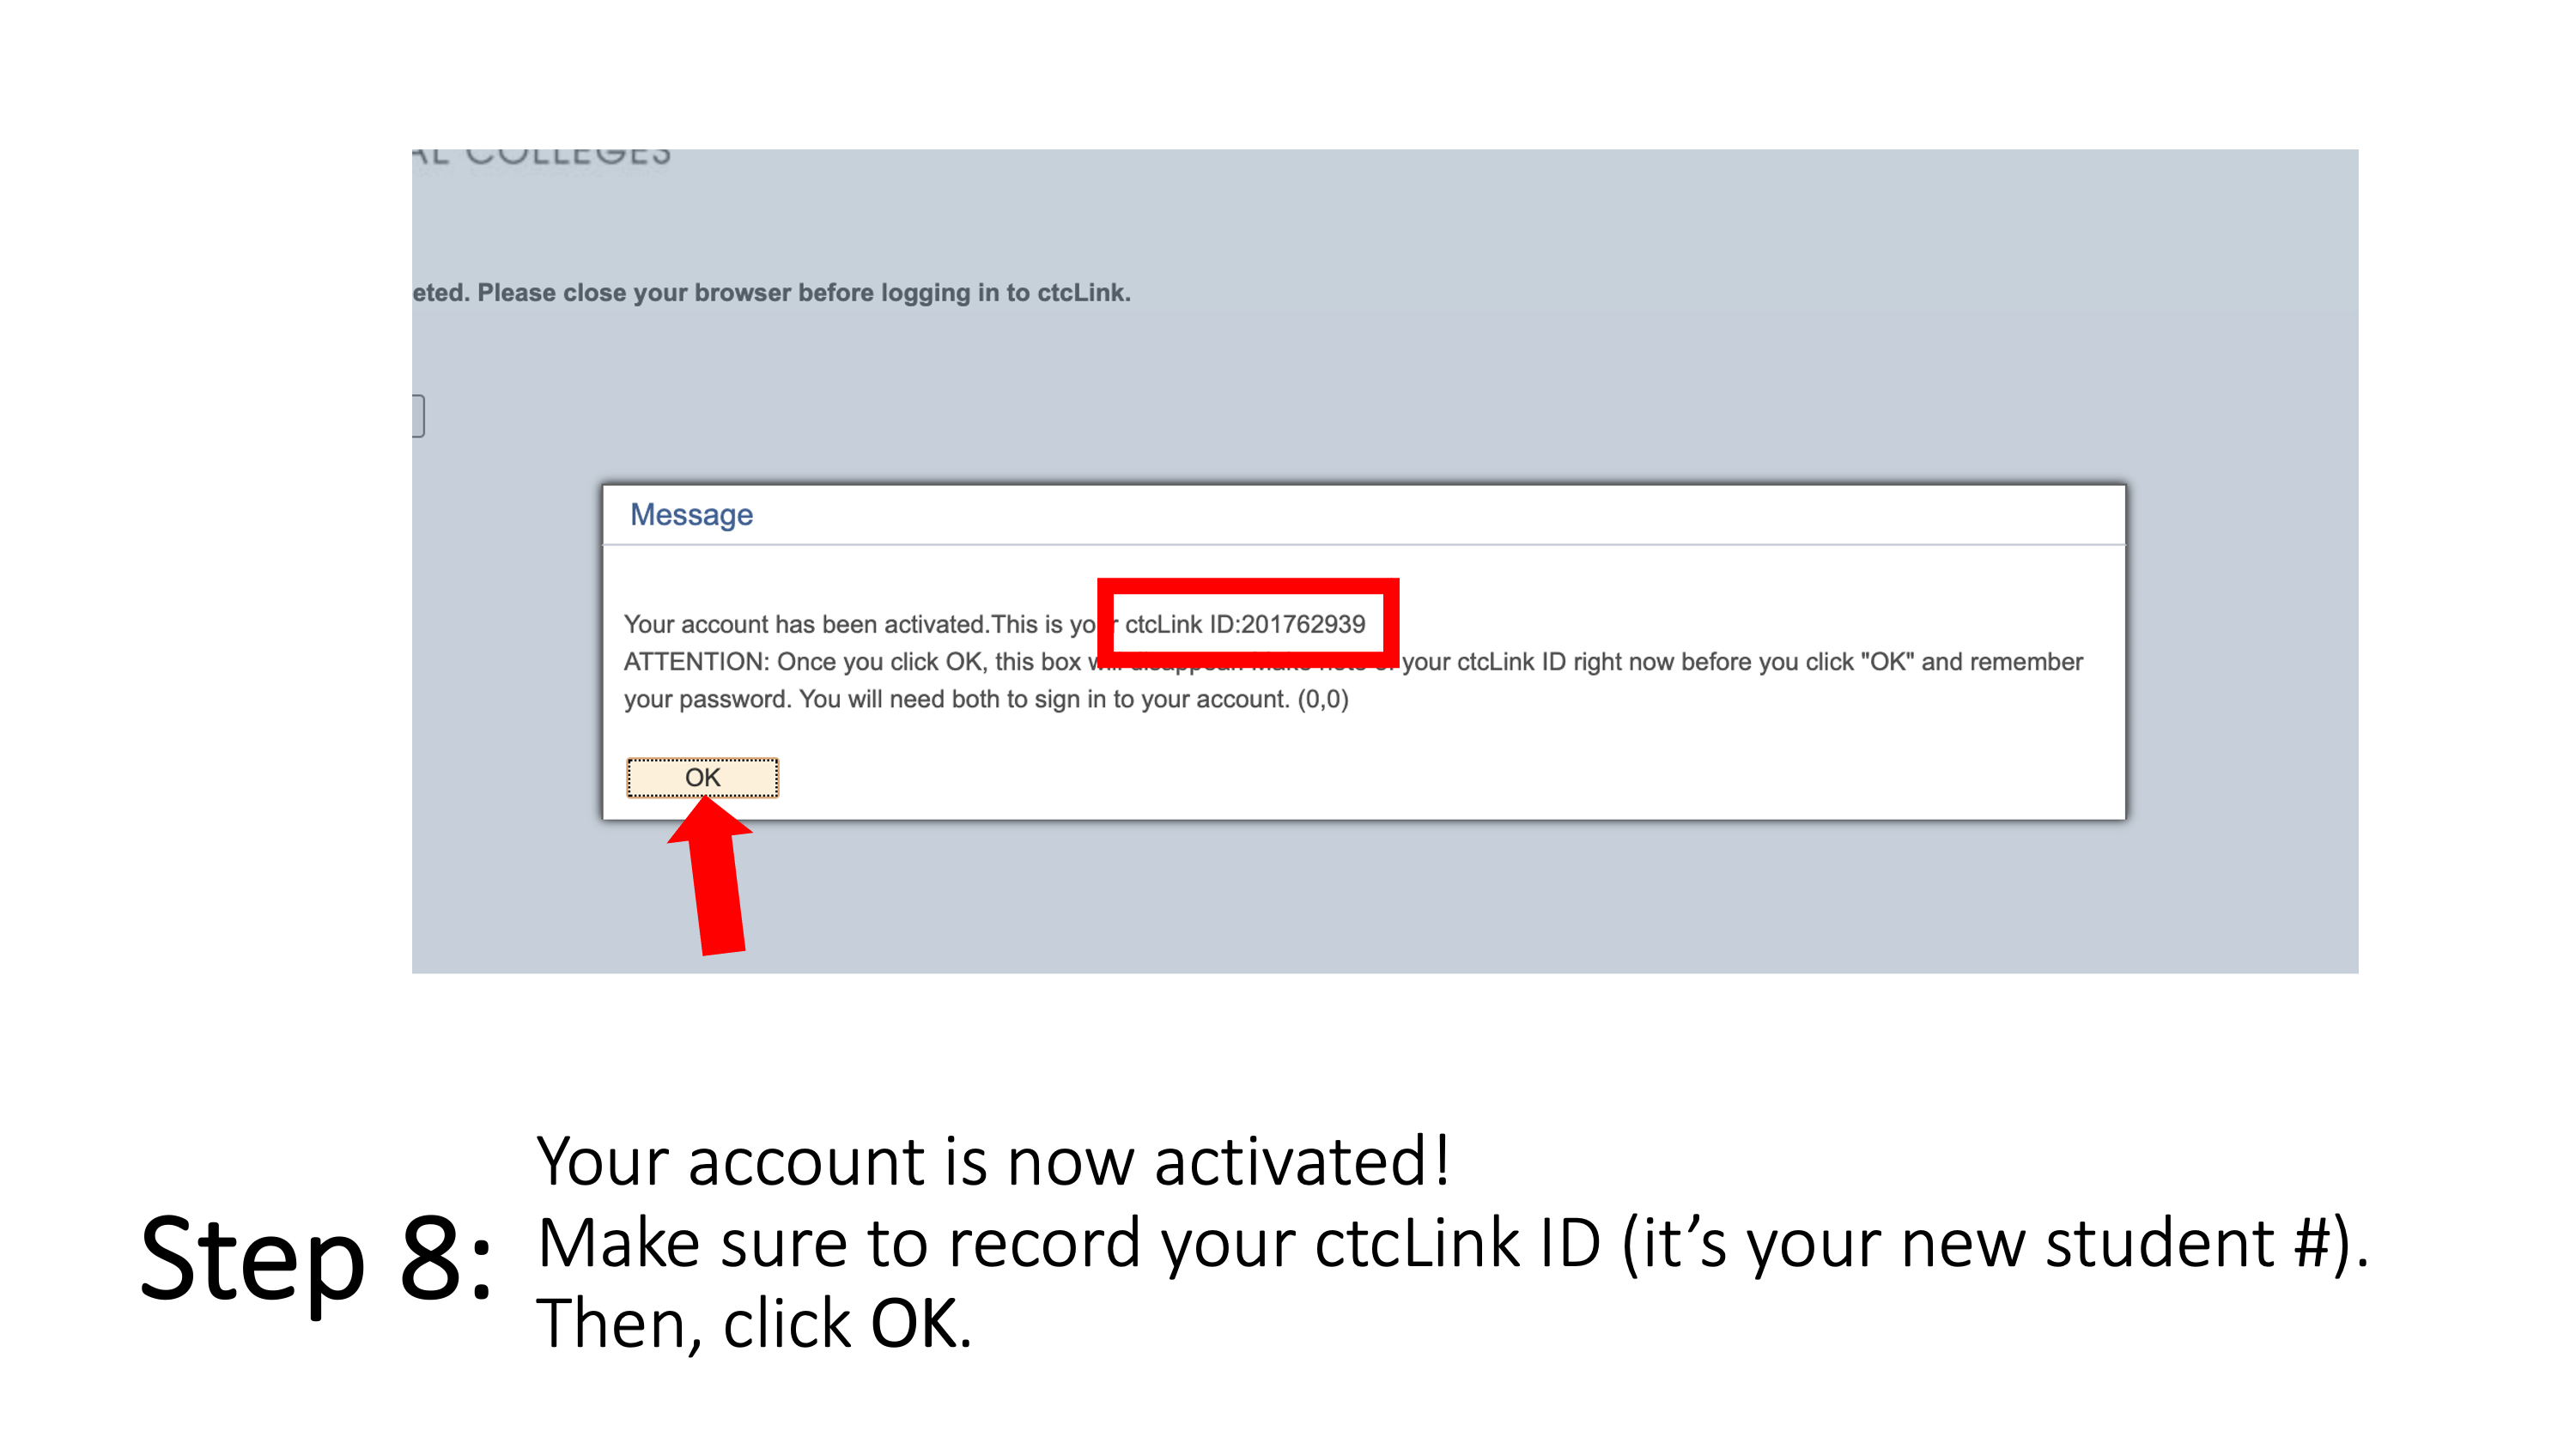 Step 8: Your account is now activated! Make sure to record your ctcLink ID (it’s your new student #). Then, click OK.